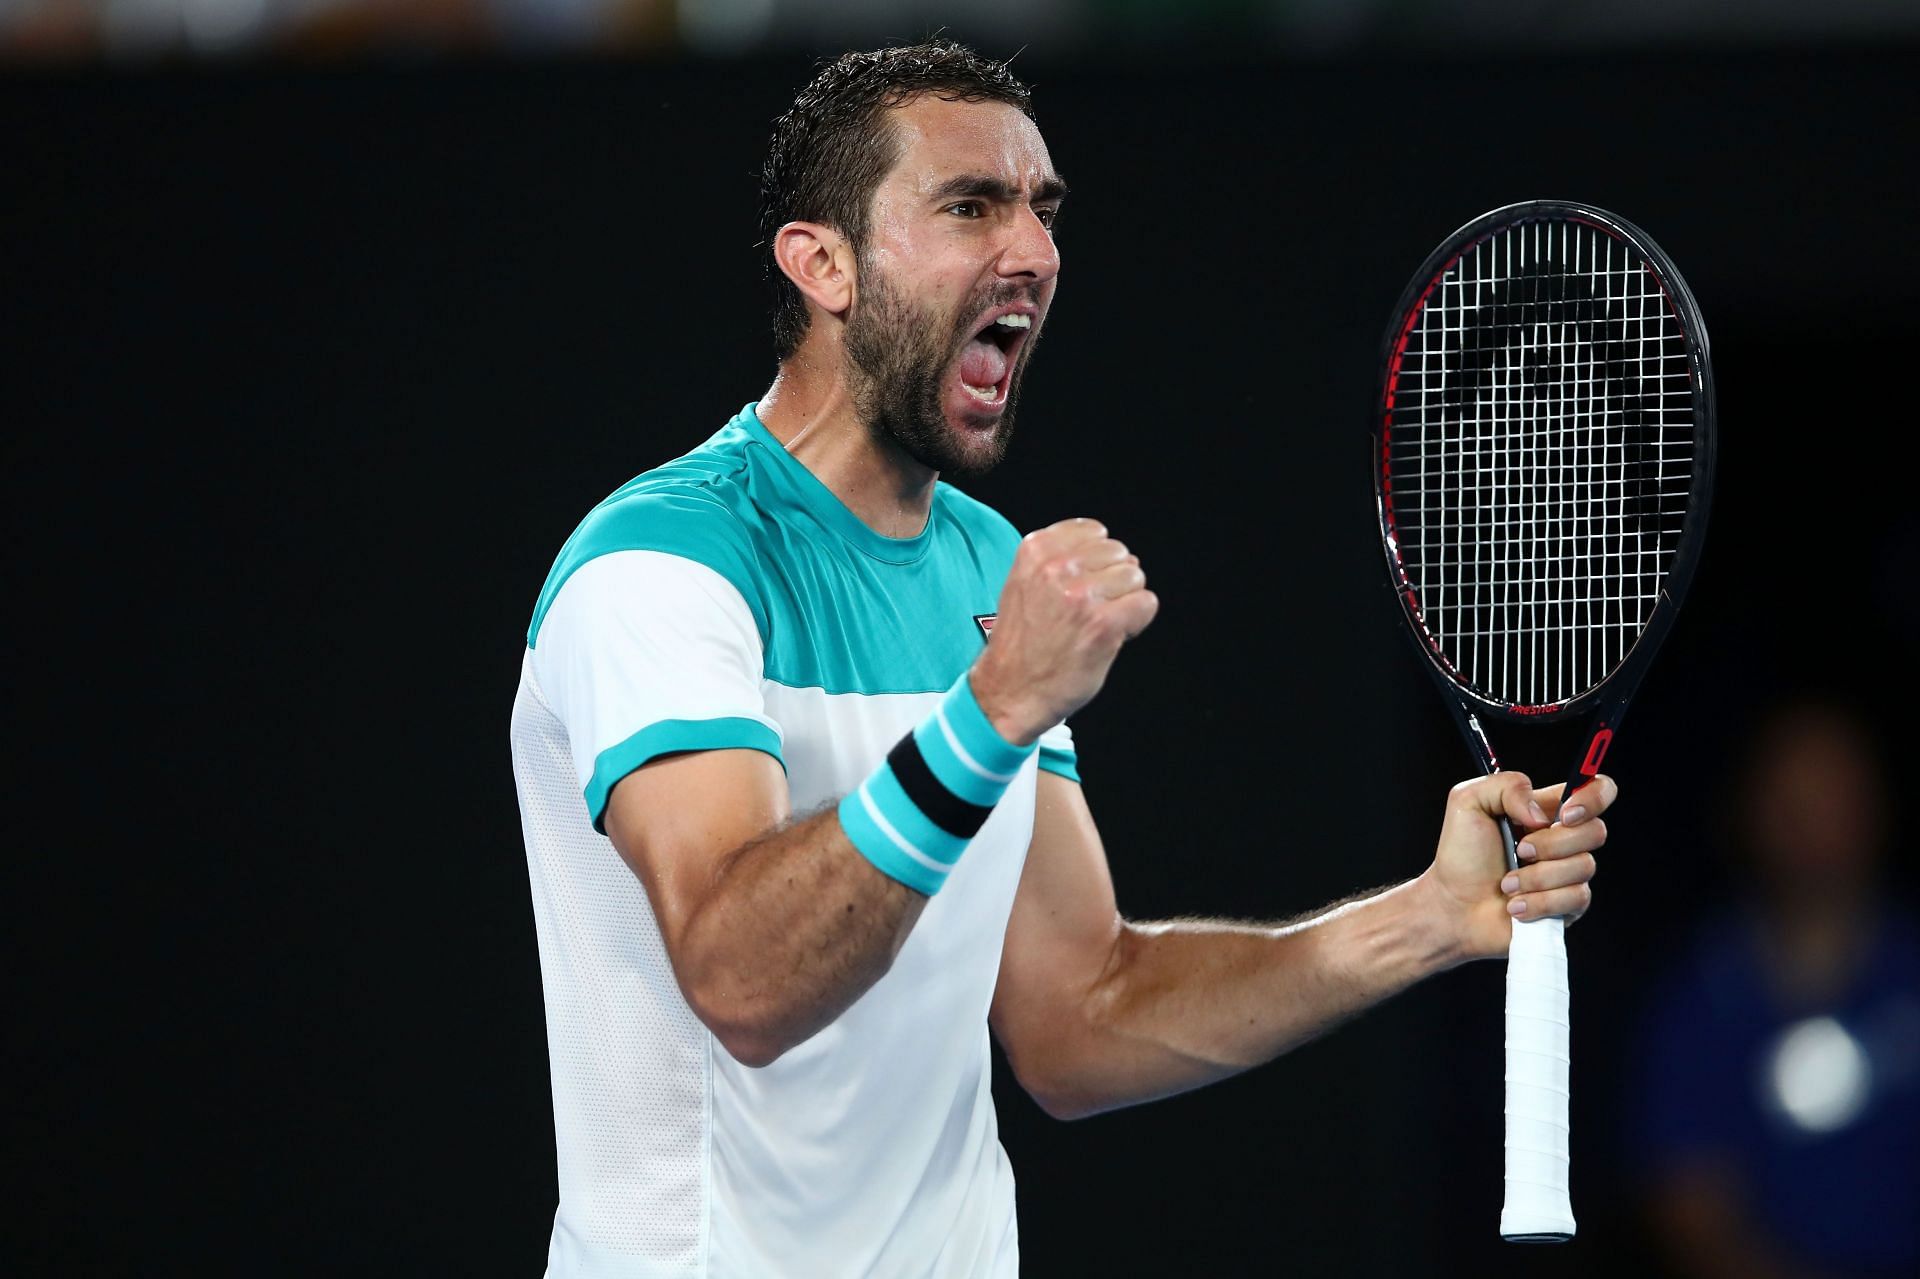 Cilic will be looking to make a strong start to the new season.